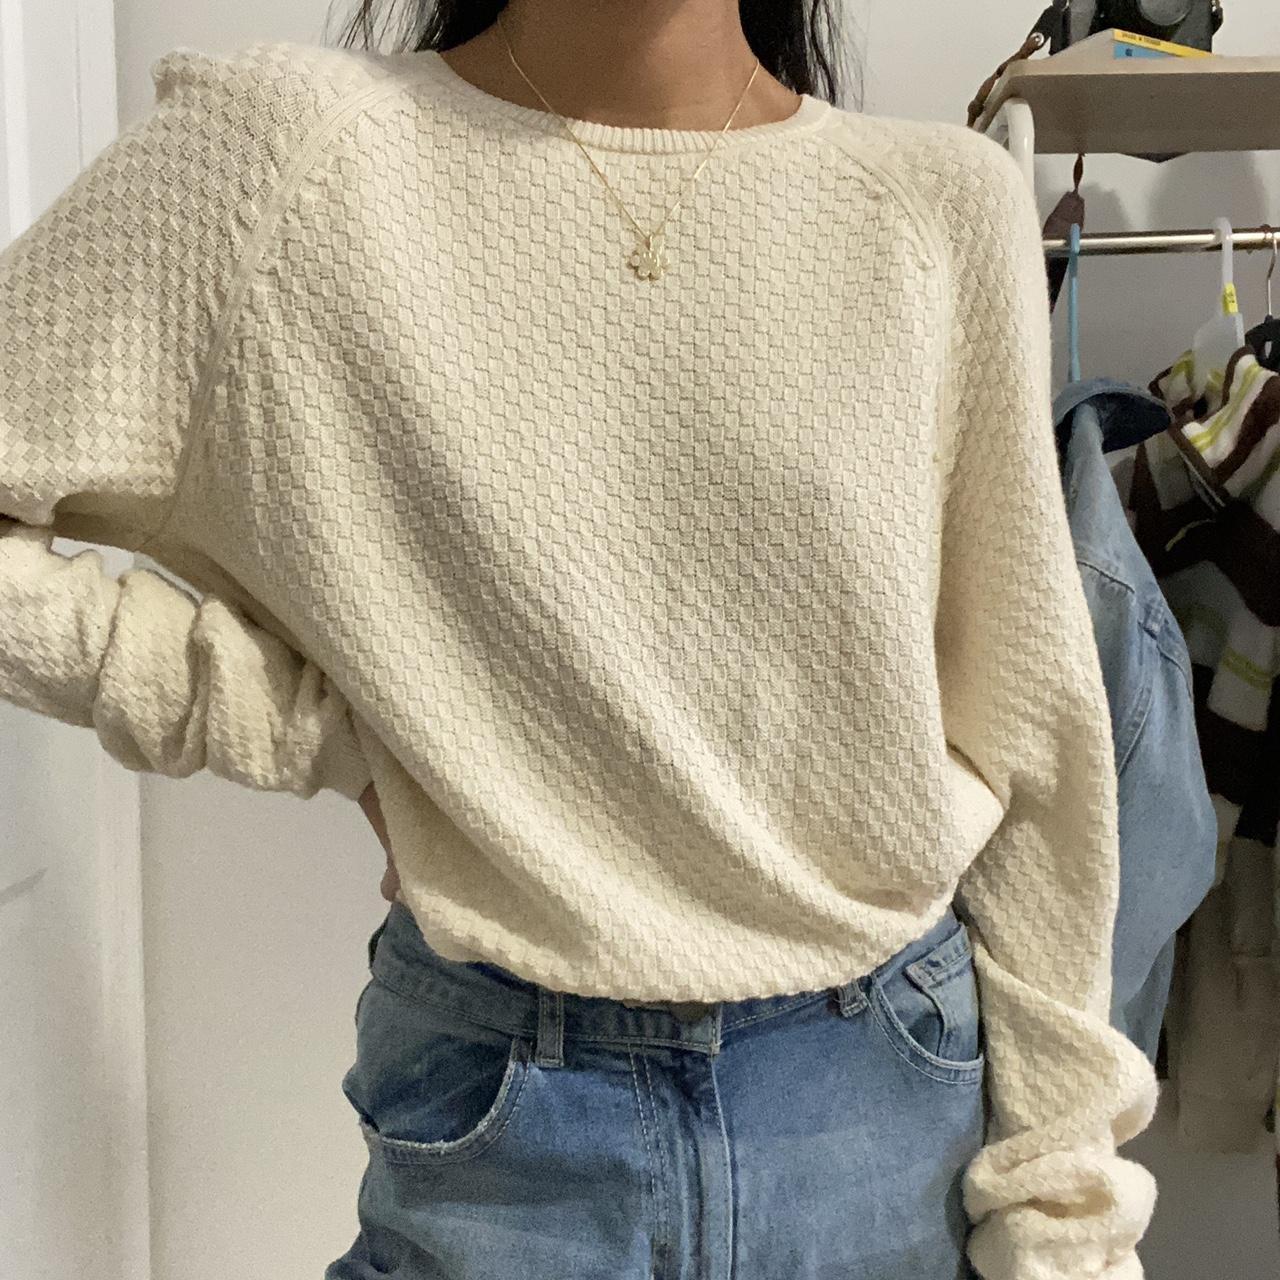 CREAM WAFFLE KNIT SWEATER This sweater goes with... - Depop